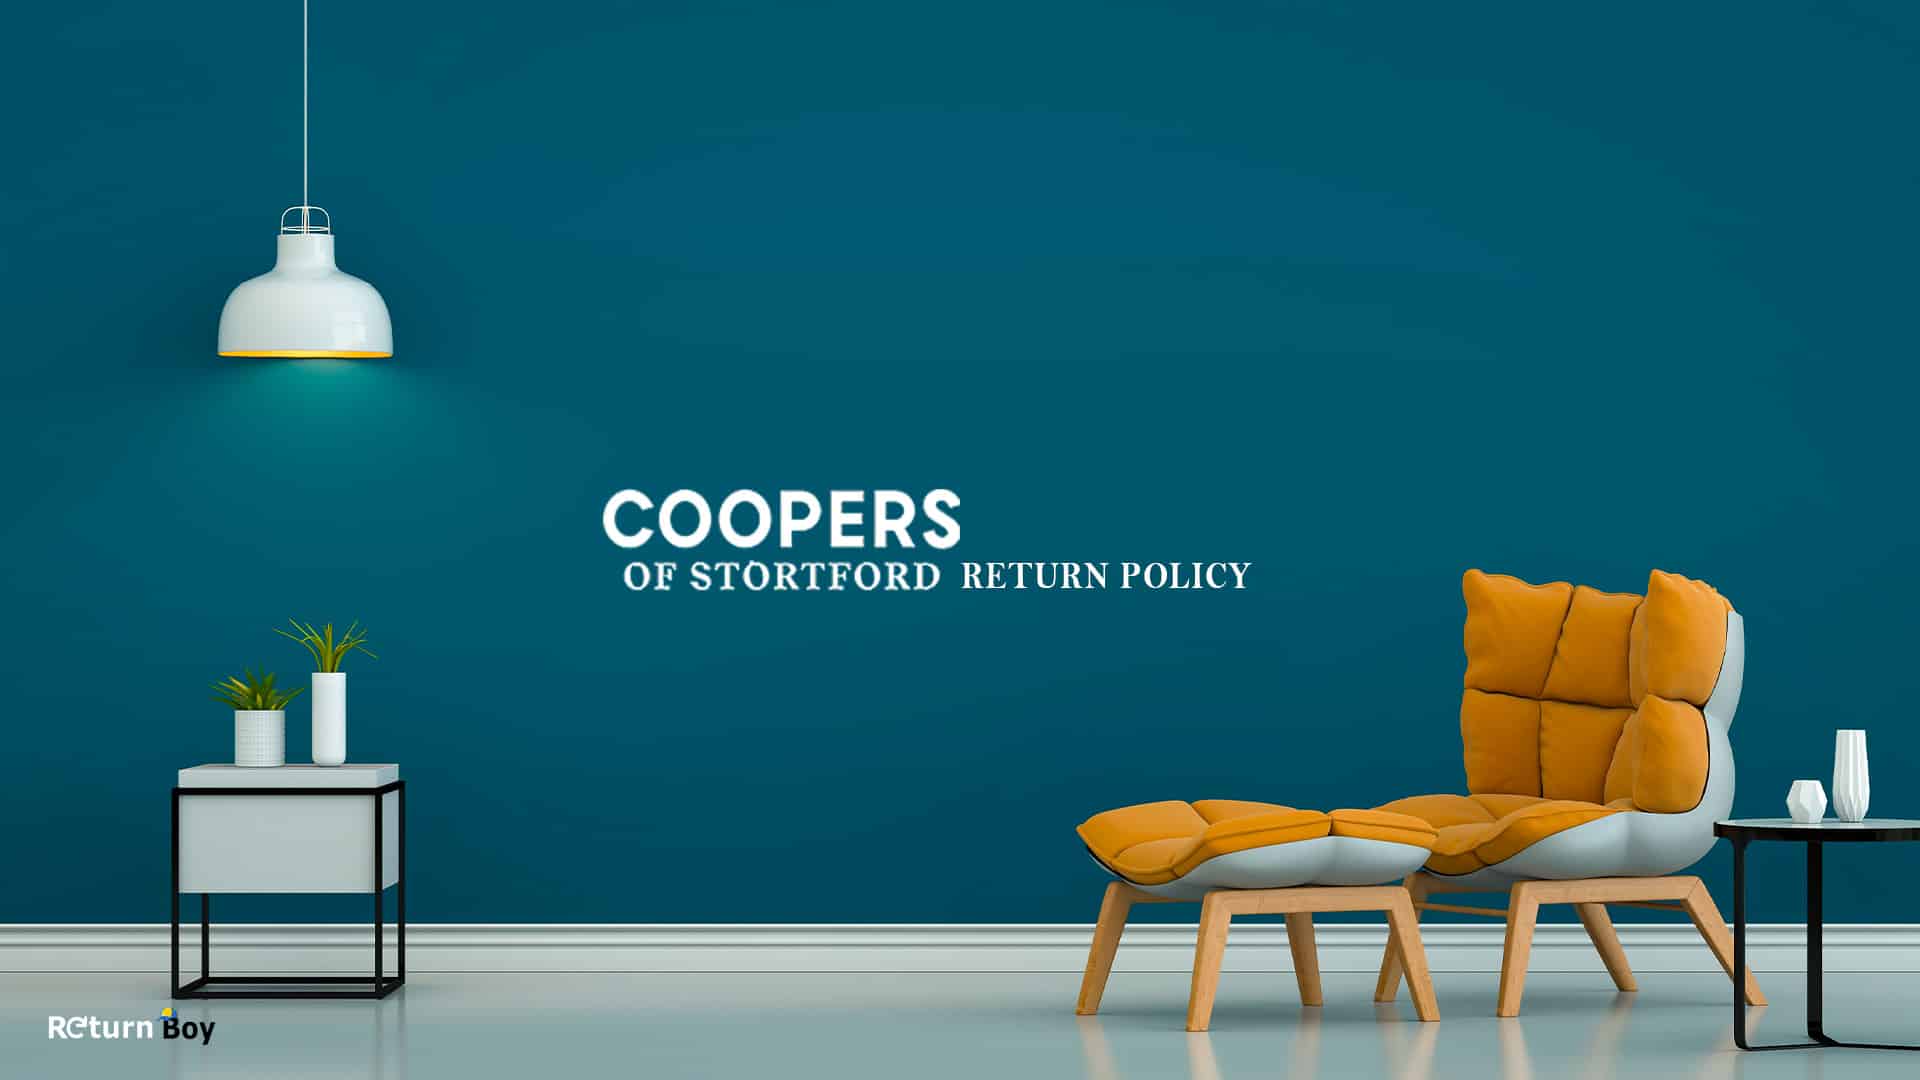 Coopers of Stortford Return Policy